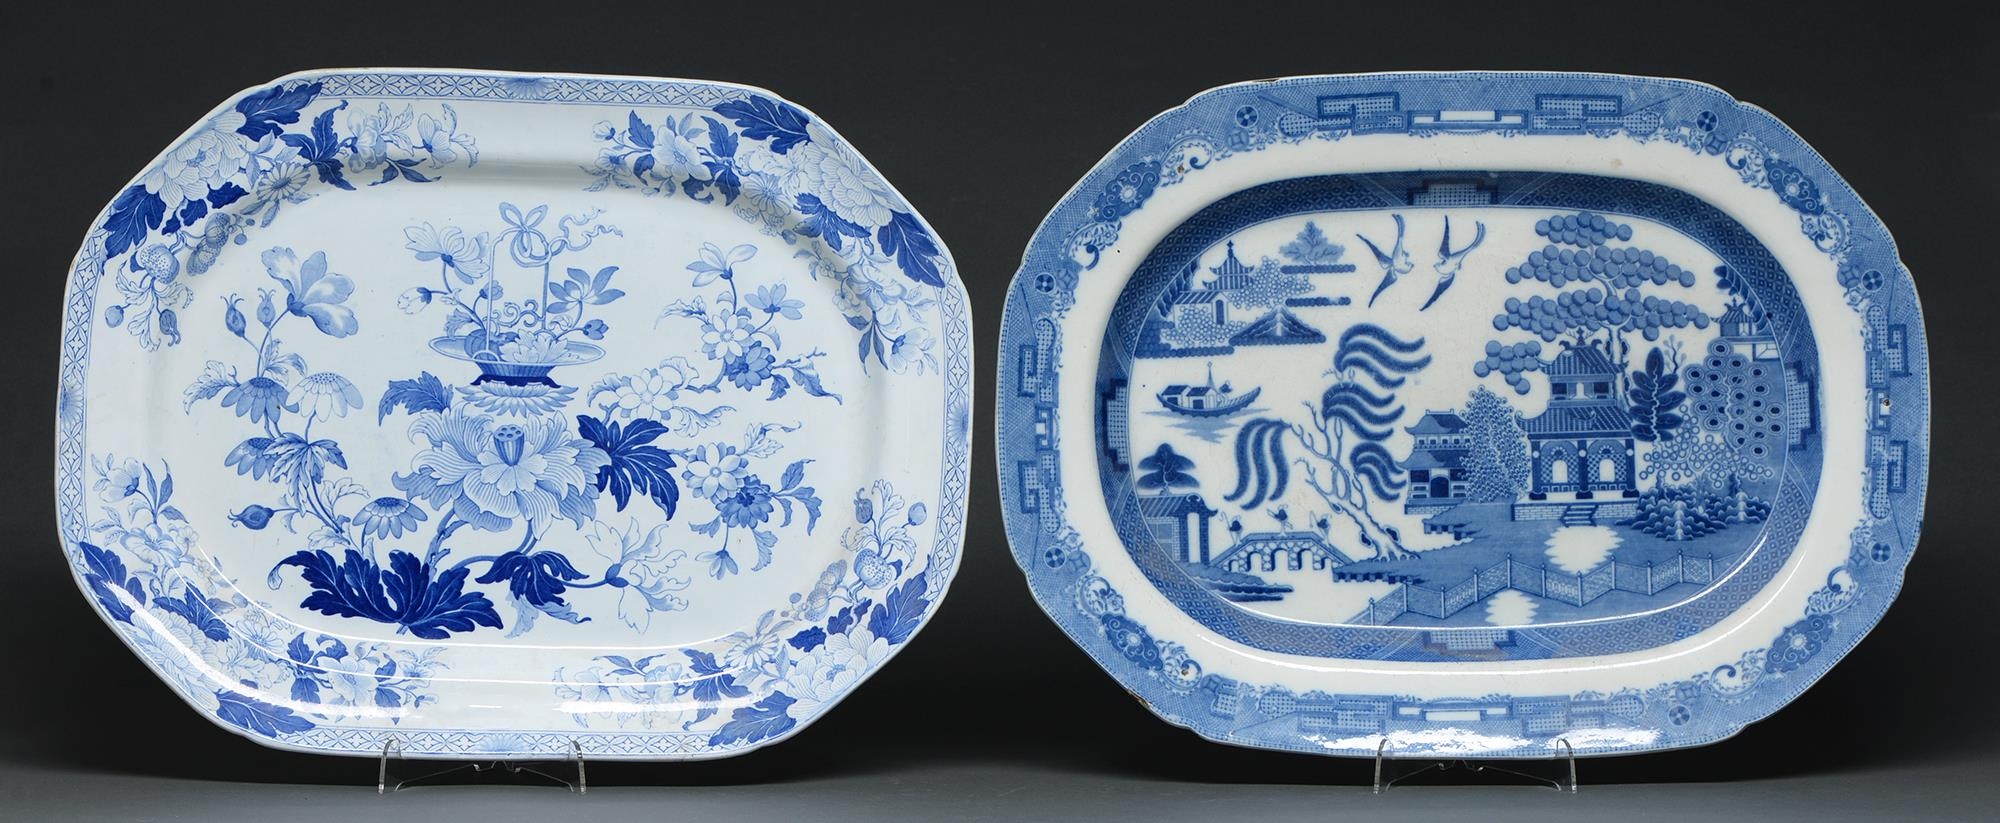 A Staffordshire blue printed pearlware Willow pattern meat dish, possibly Spode, c1810, 53.5cm l and